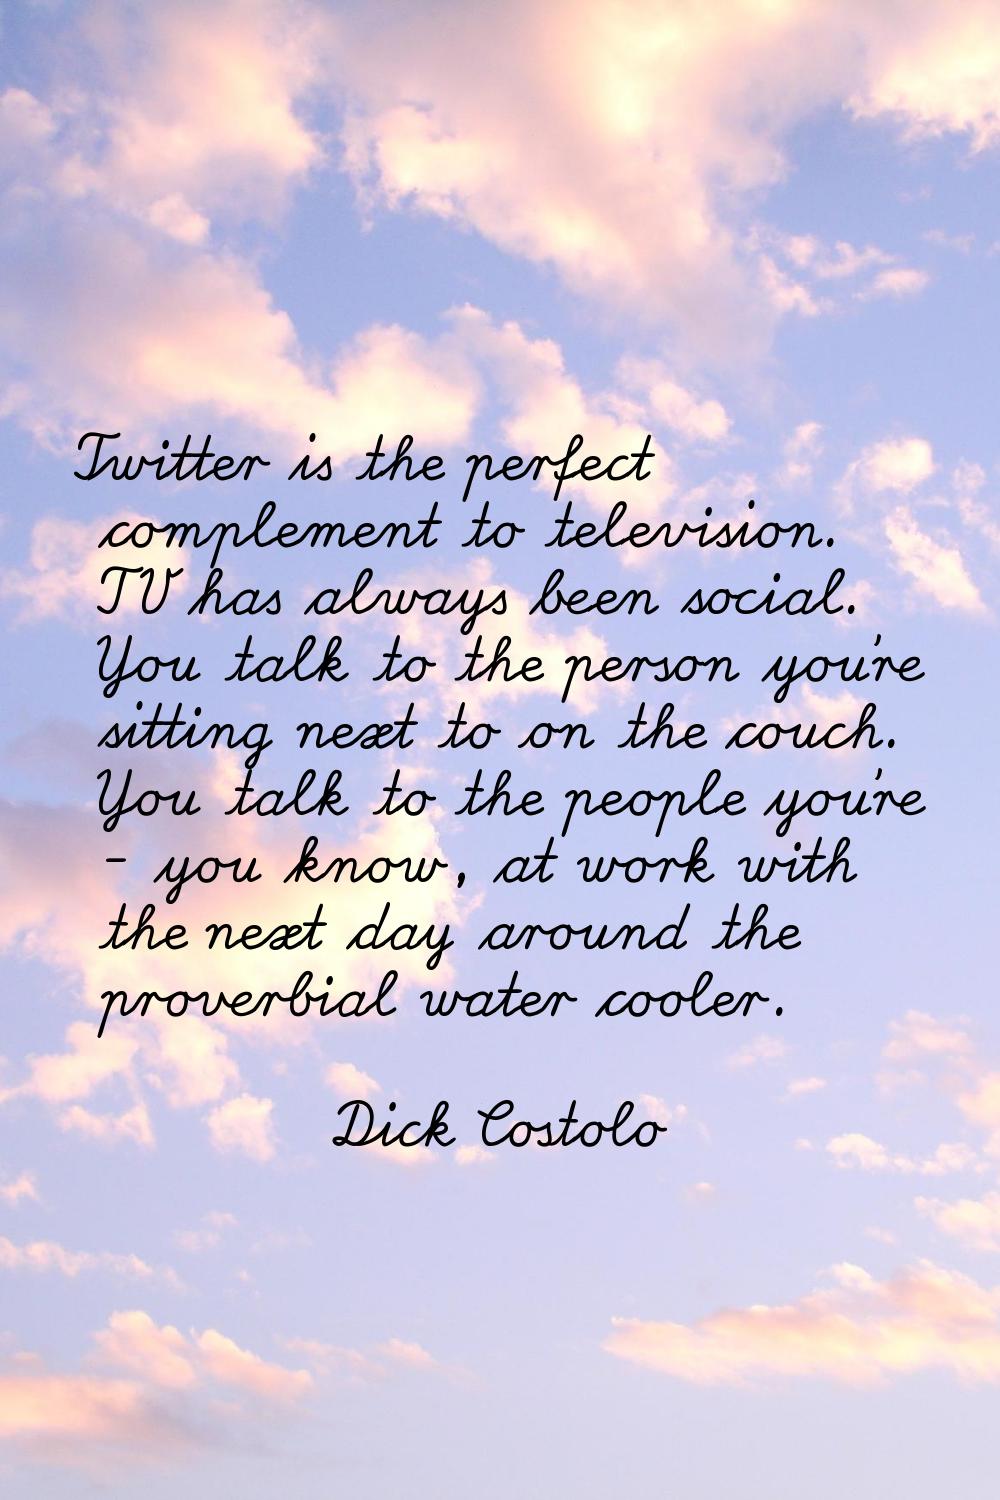 Twitter is the perfect complement to television. TV has always been social. You talk to the person 